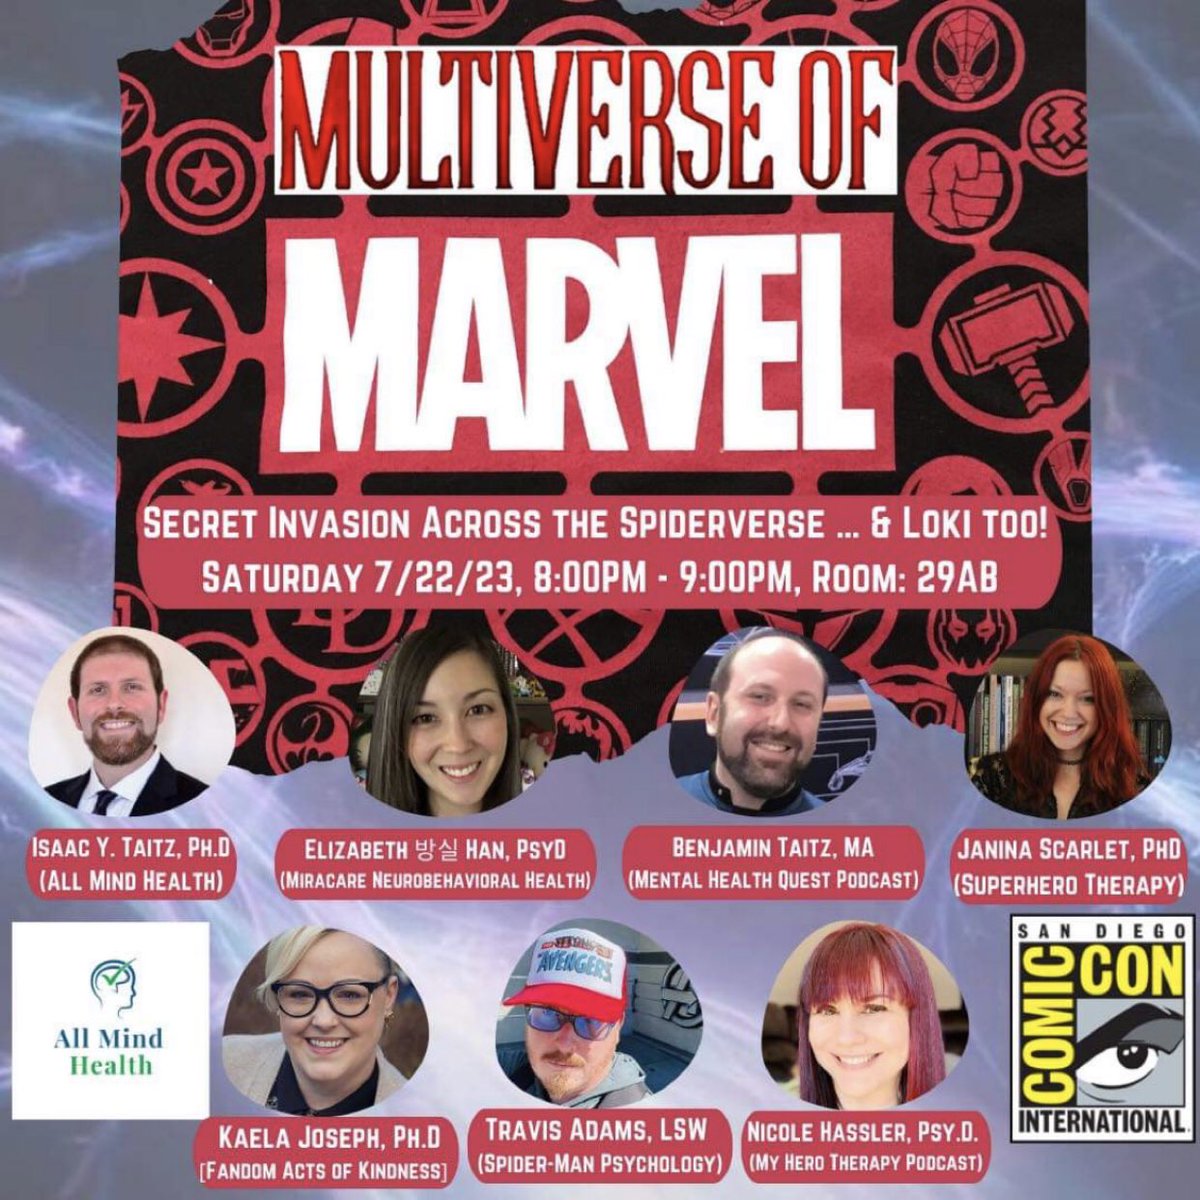 Super stoked to be repping @MHQPodcast and @MyHeroTherapy at @Comic_Con with super cool people including @AllMindHealth1 @levelup_therapy @mindbodyfandom @AKNerdFighting @jordanjamparty @iKnowRio @TheToniSanchez @ShadowQuill @lizzyns @themarine_peer @DrVanessaHintz!